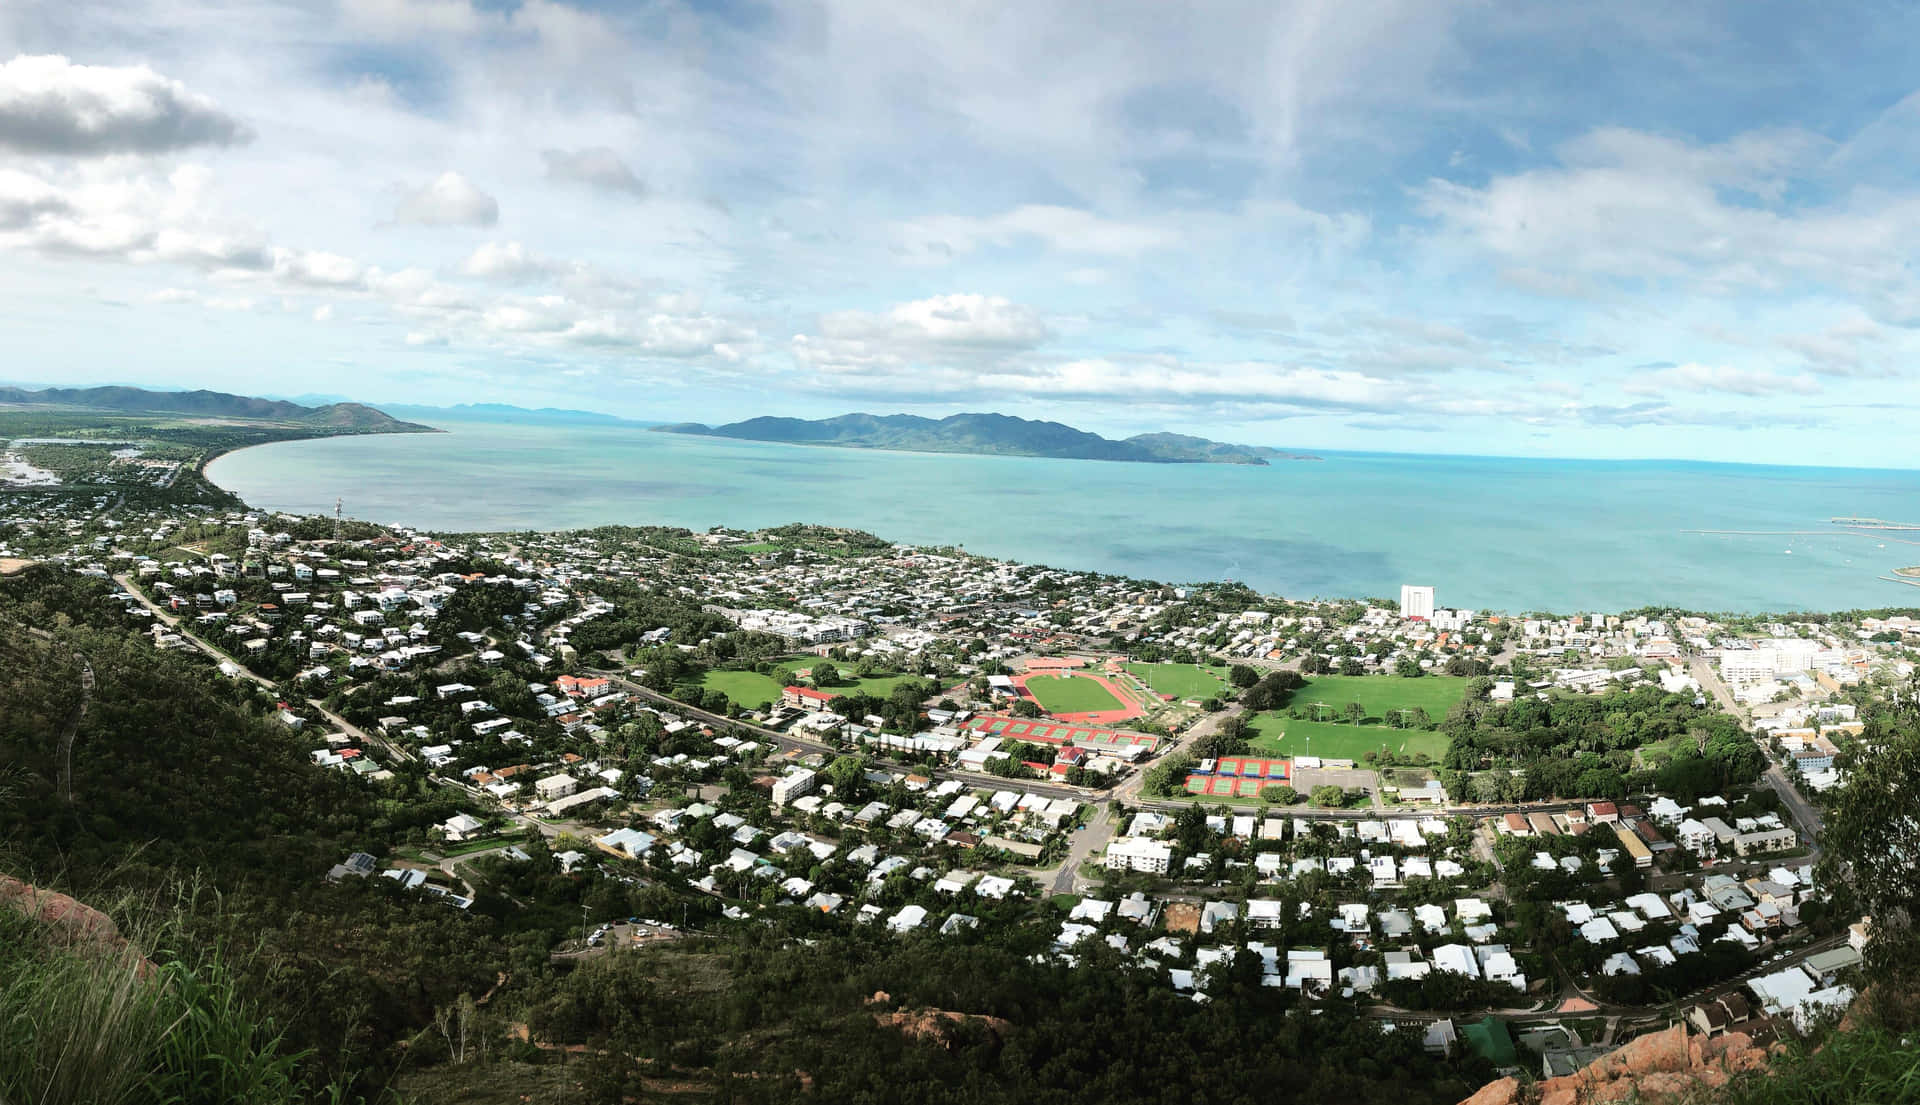 Townsville Panoramic Viewfrom Castle Hill Wallpaper